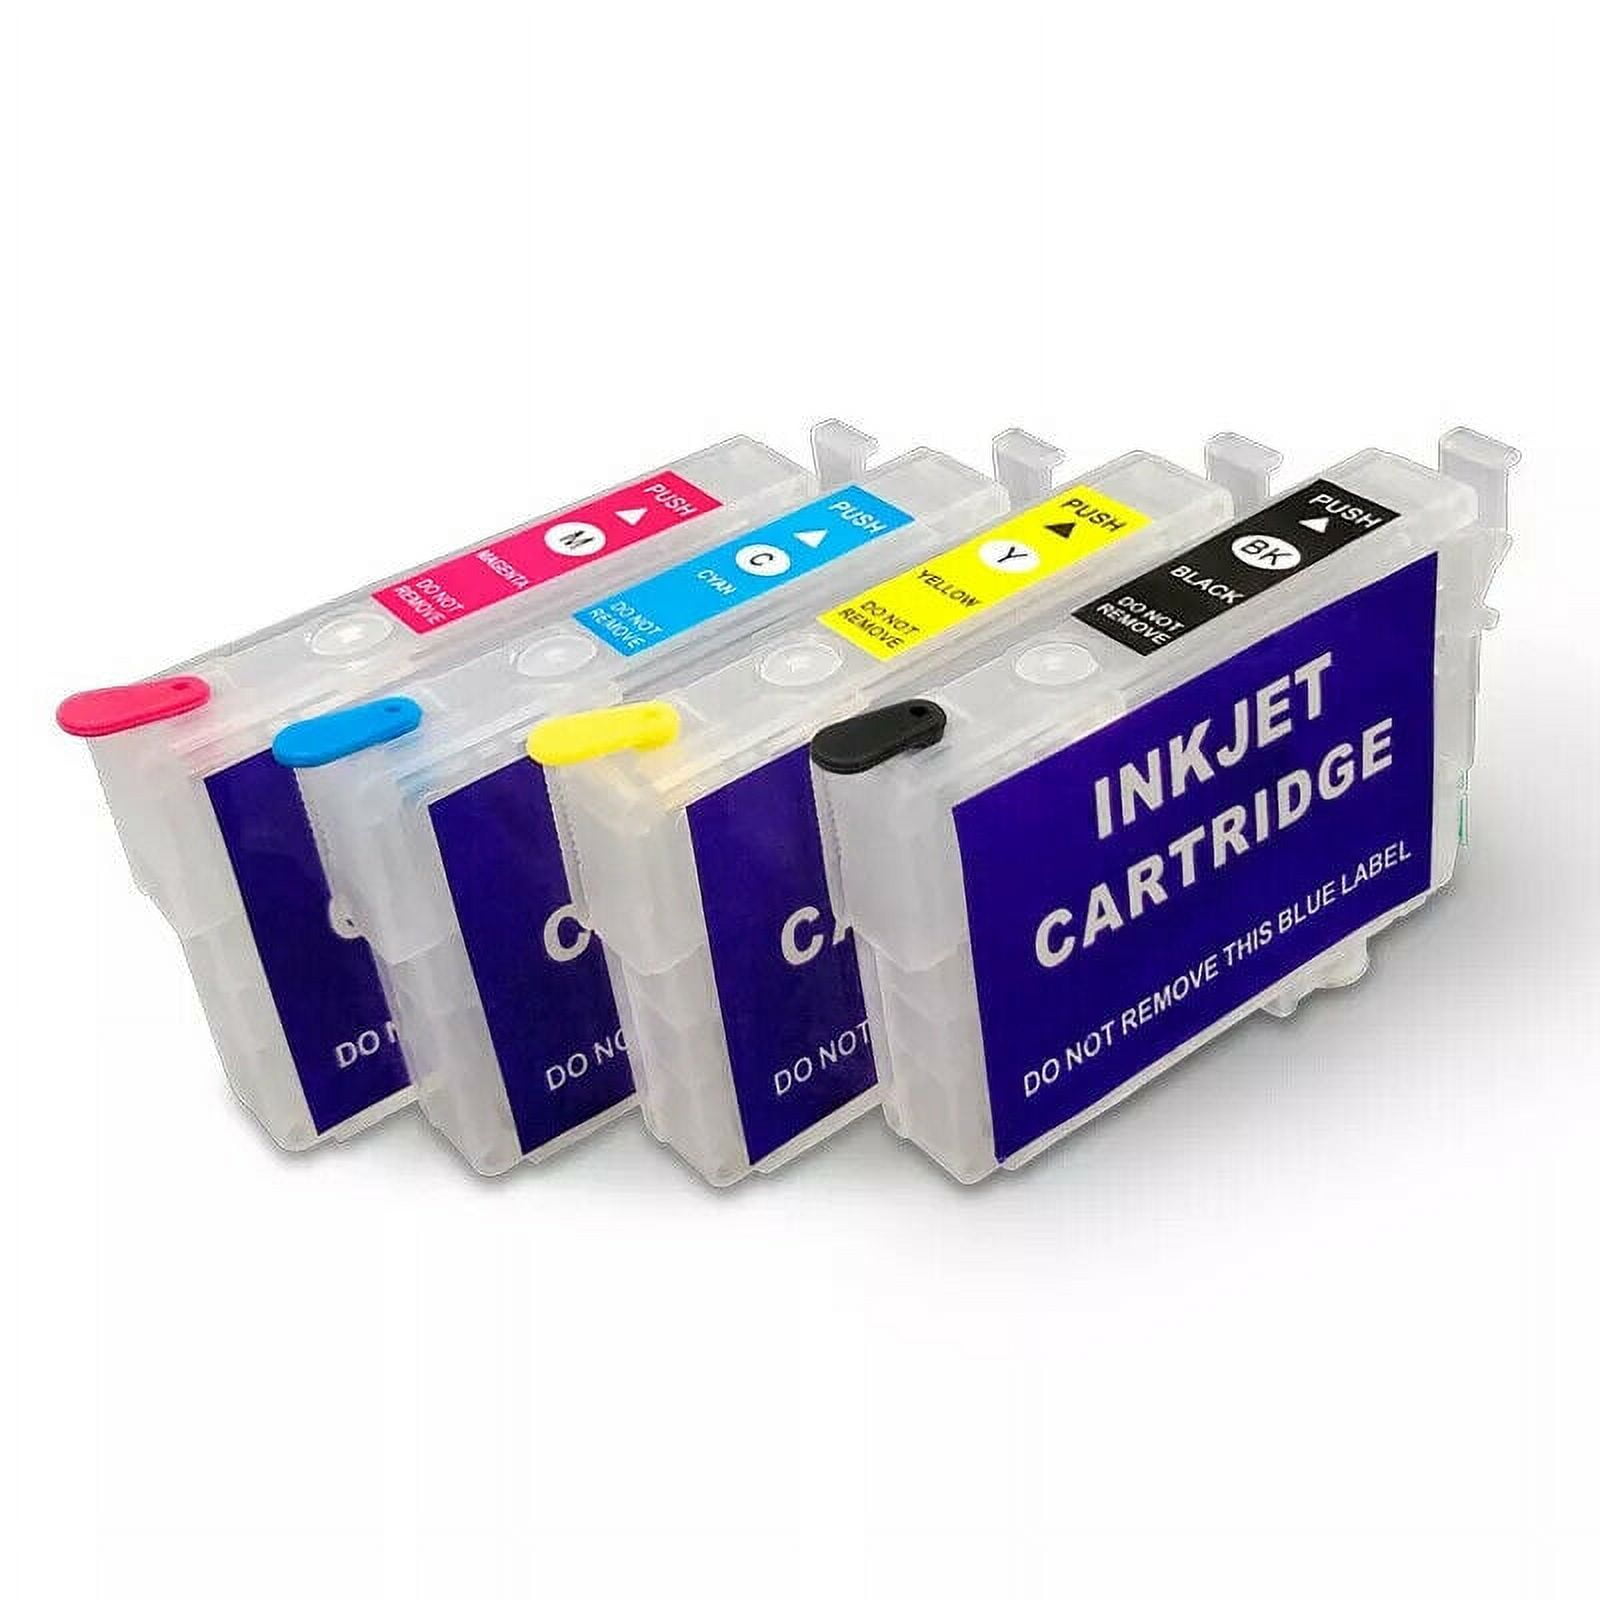 Epson xp 4205 refillable ink cartridges with chip -  Canada